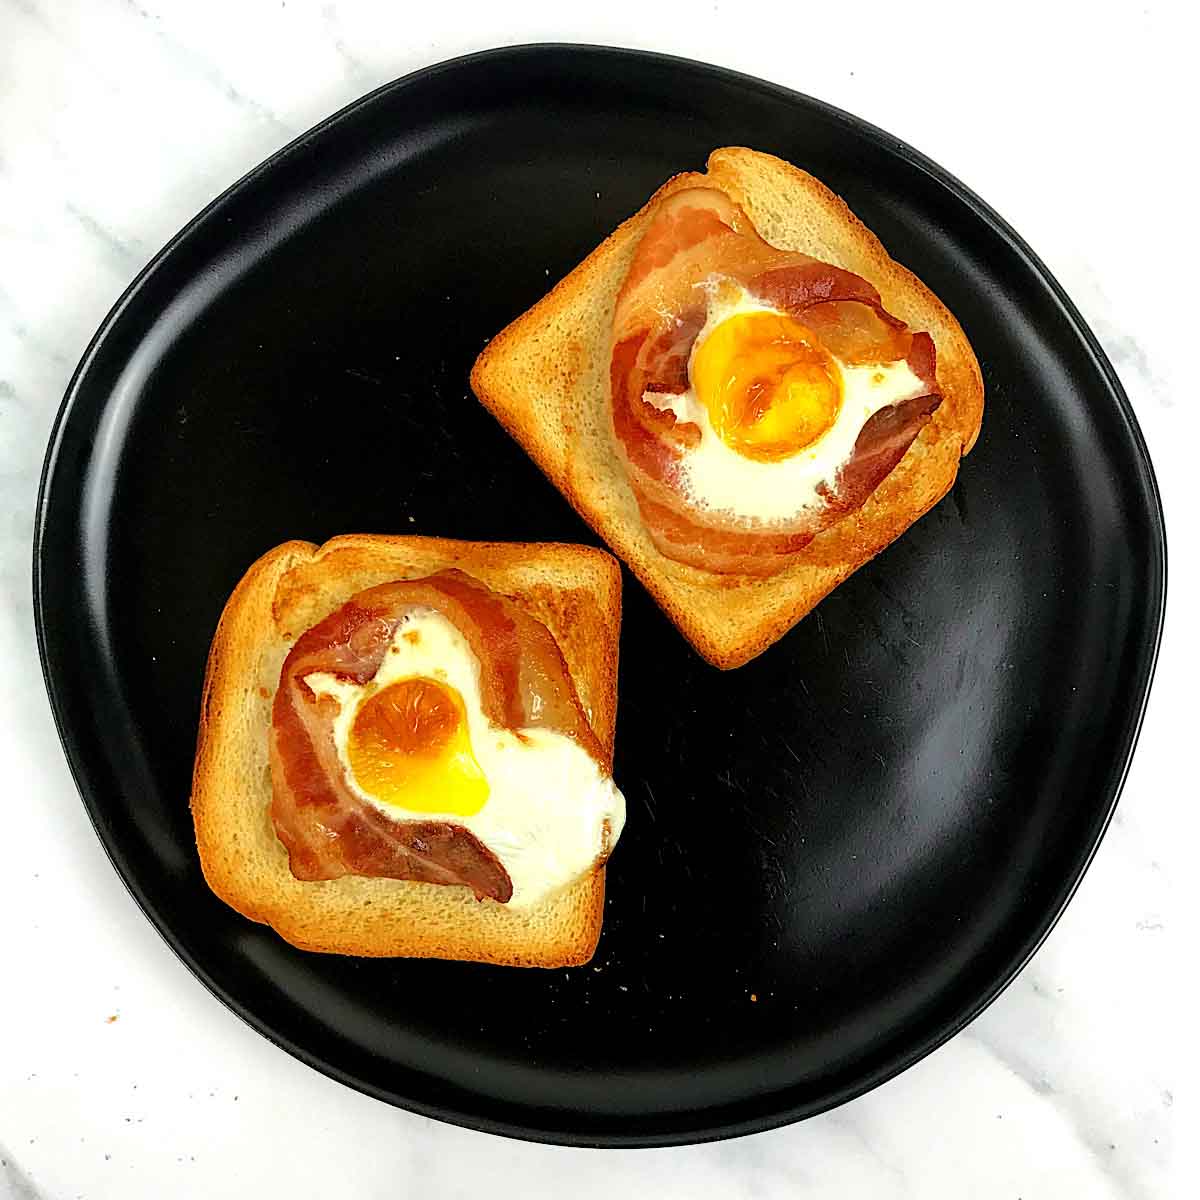 Eggs, Bacon and Toast in Air fryer